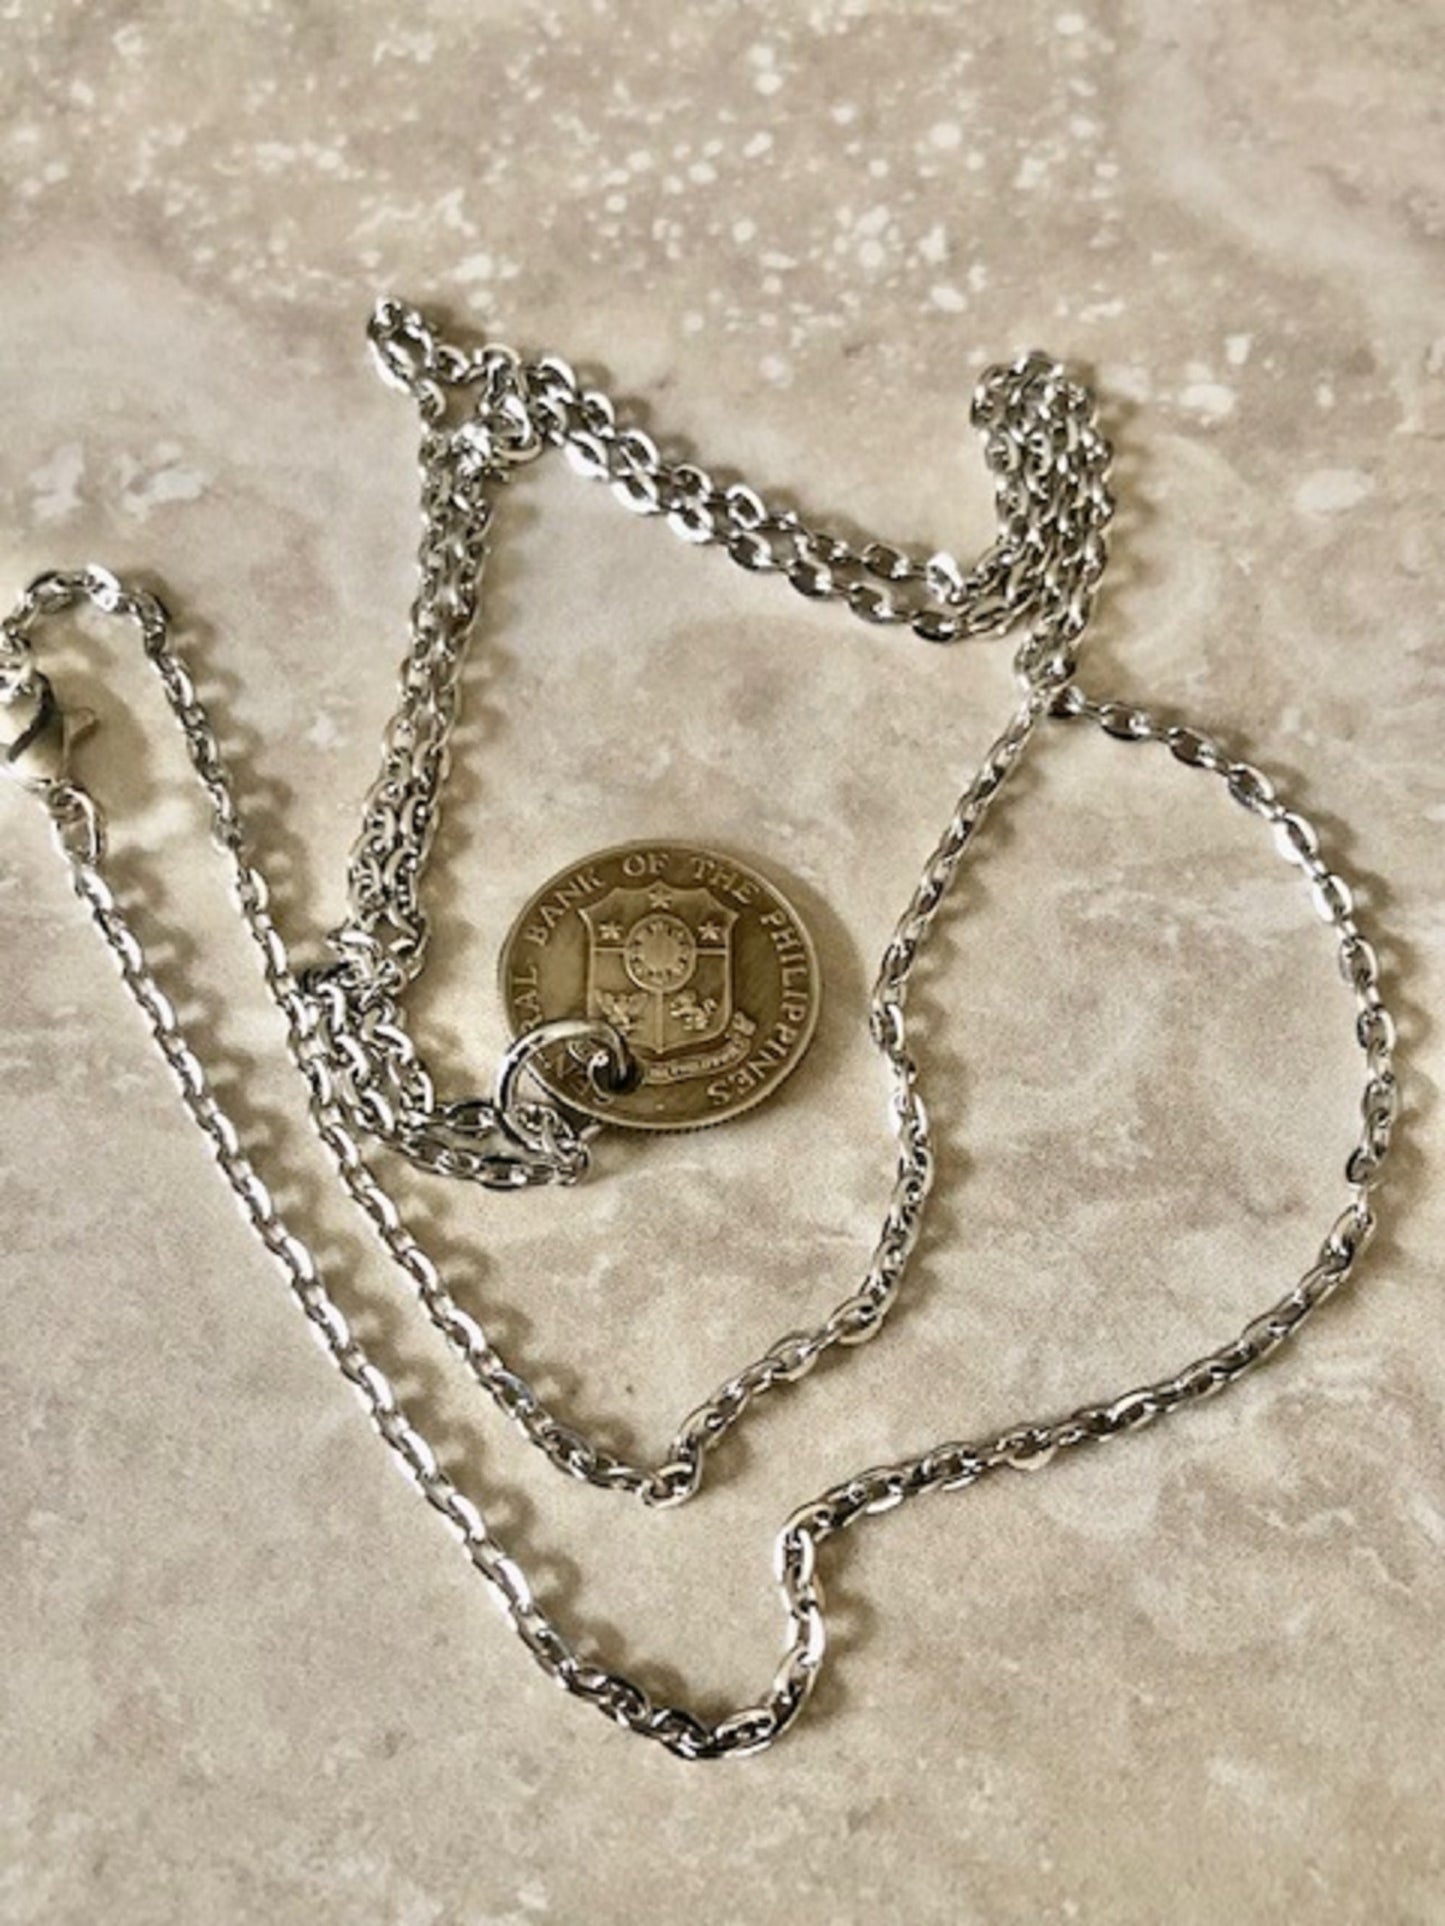 Philippines Coin Necklace Pendant Pilipinas 10 Centavos Vintage Custom Made Rare coins - Coin Enthusiast - Handmade Fashion